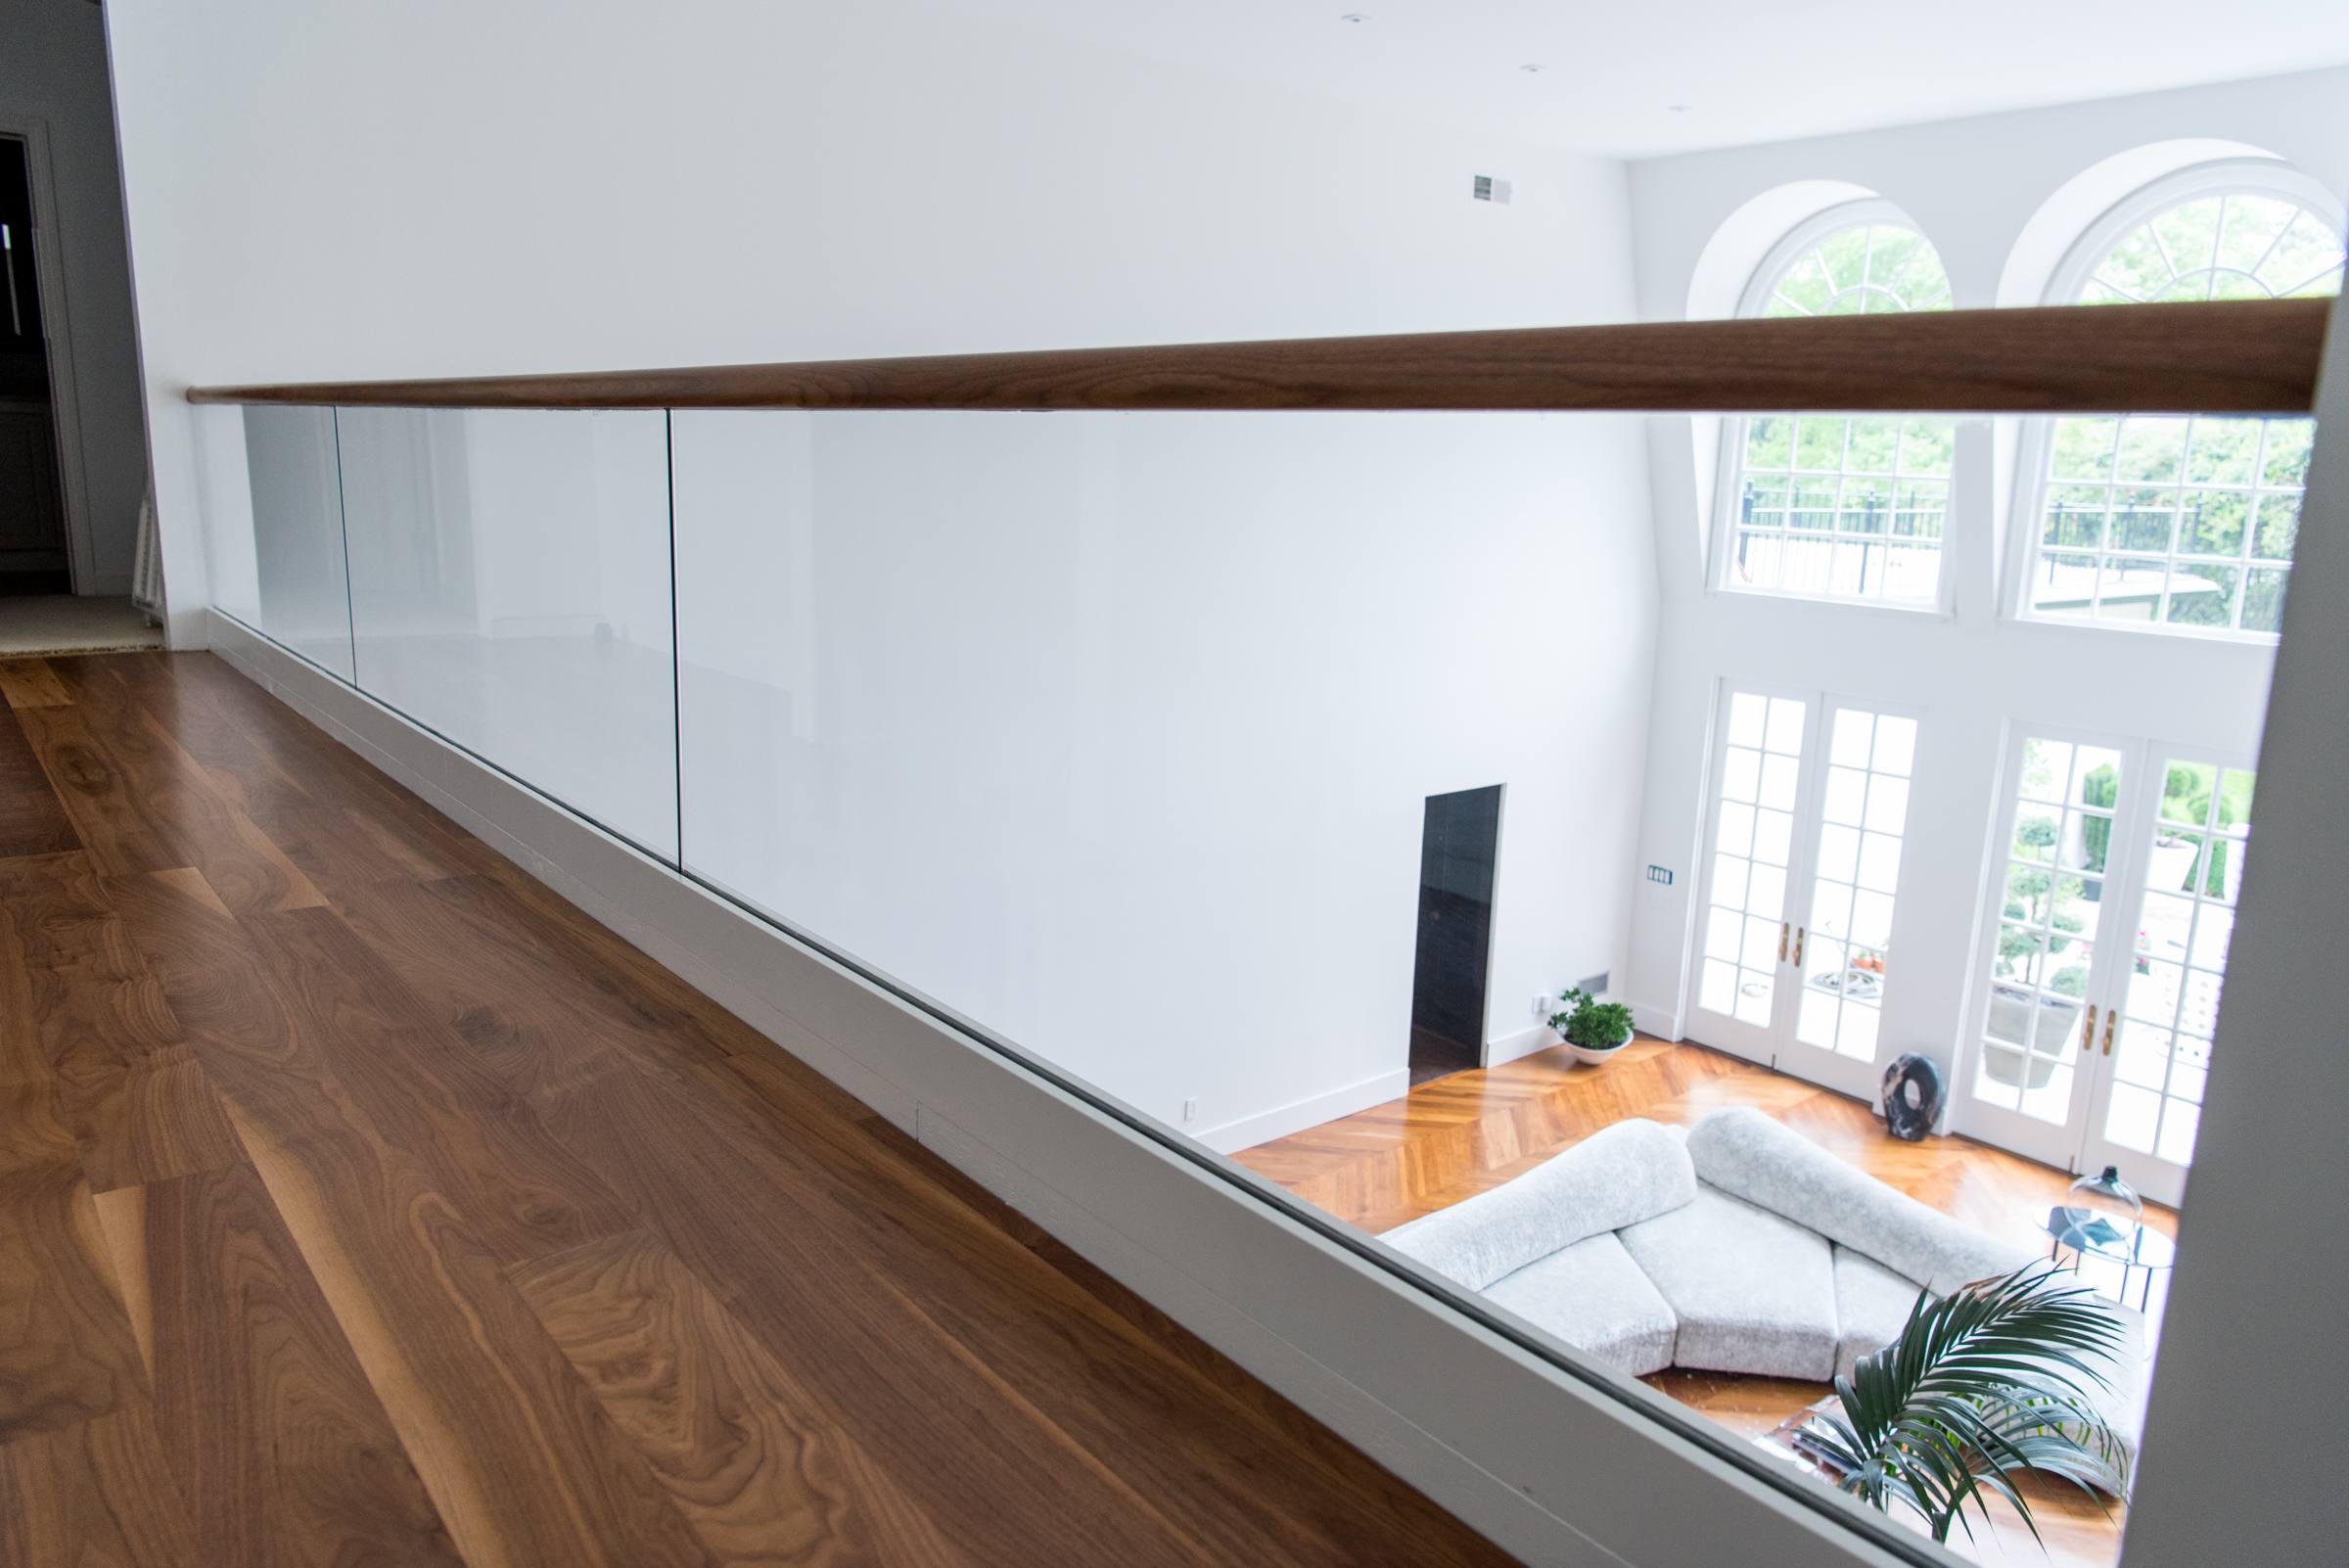 Glass railing for a balcony overlooking the living area.